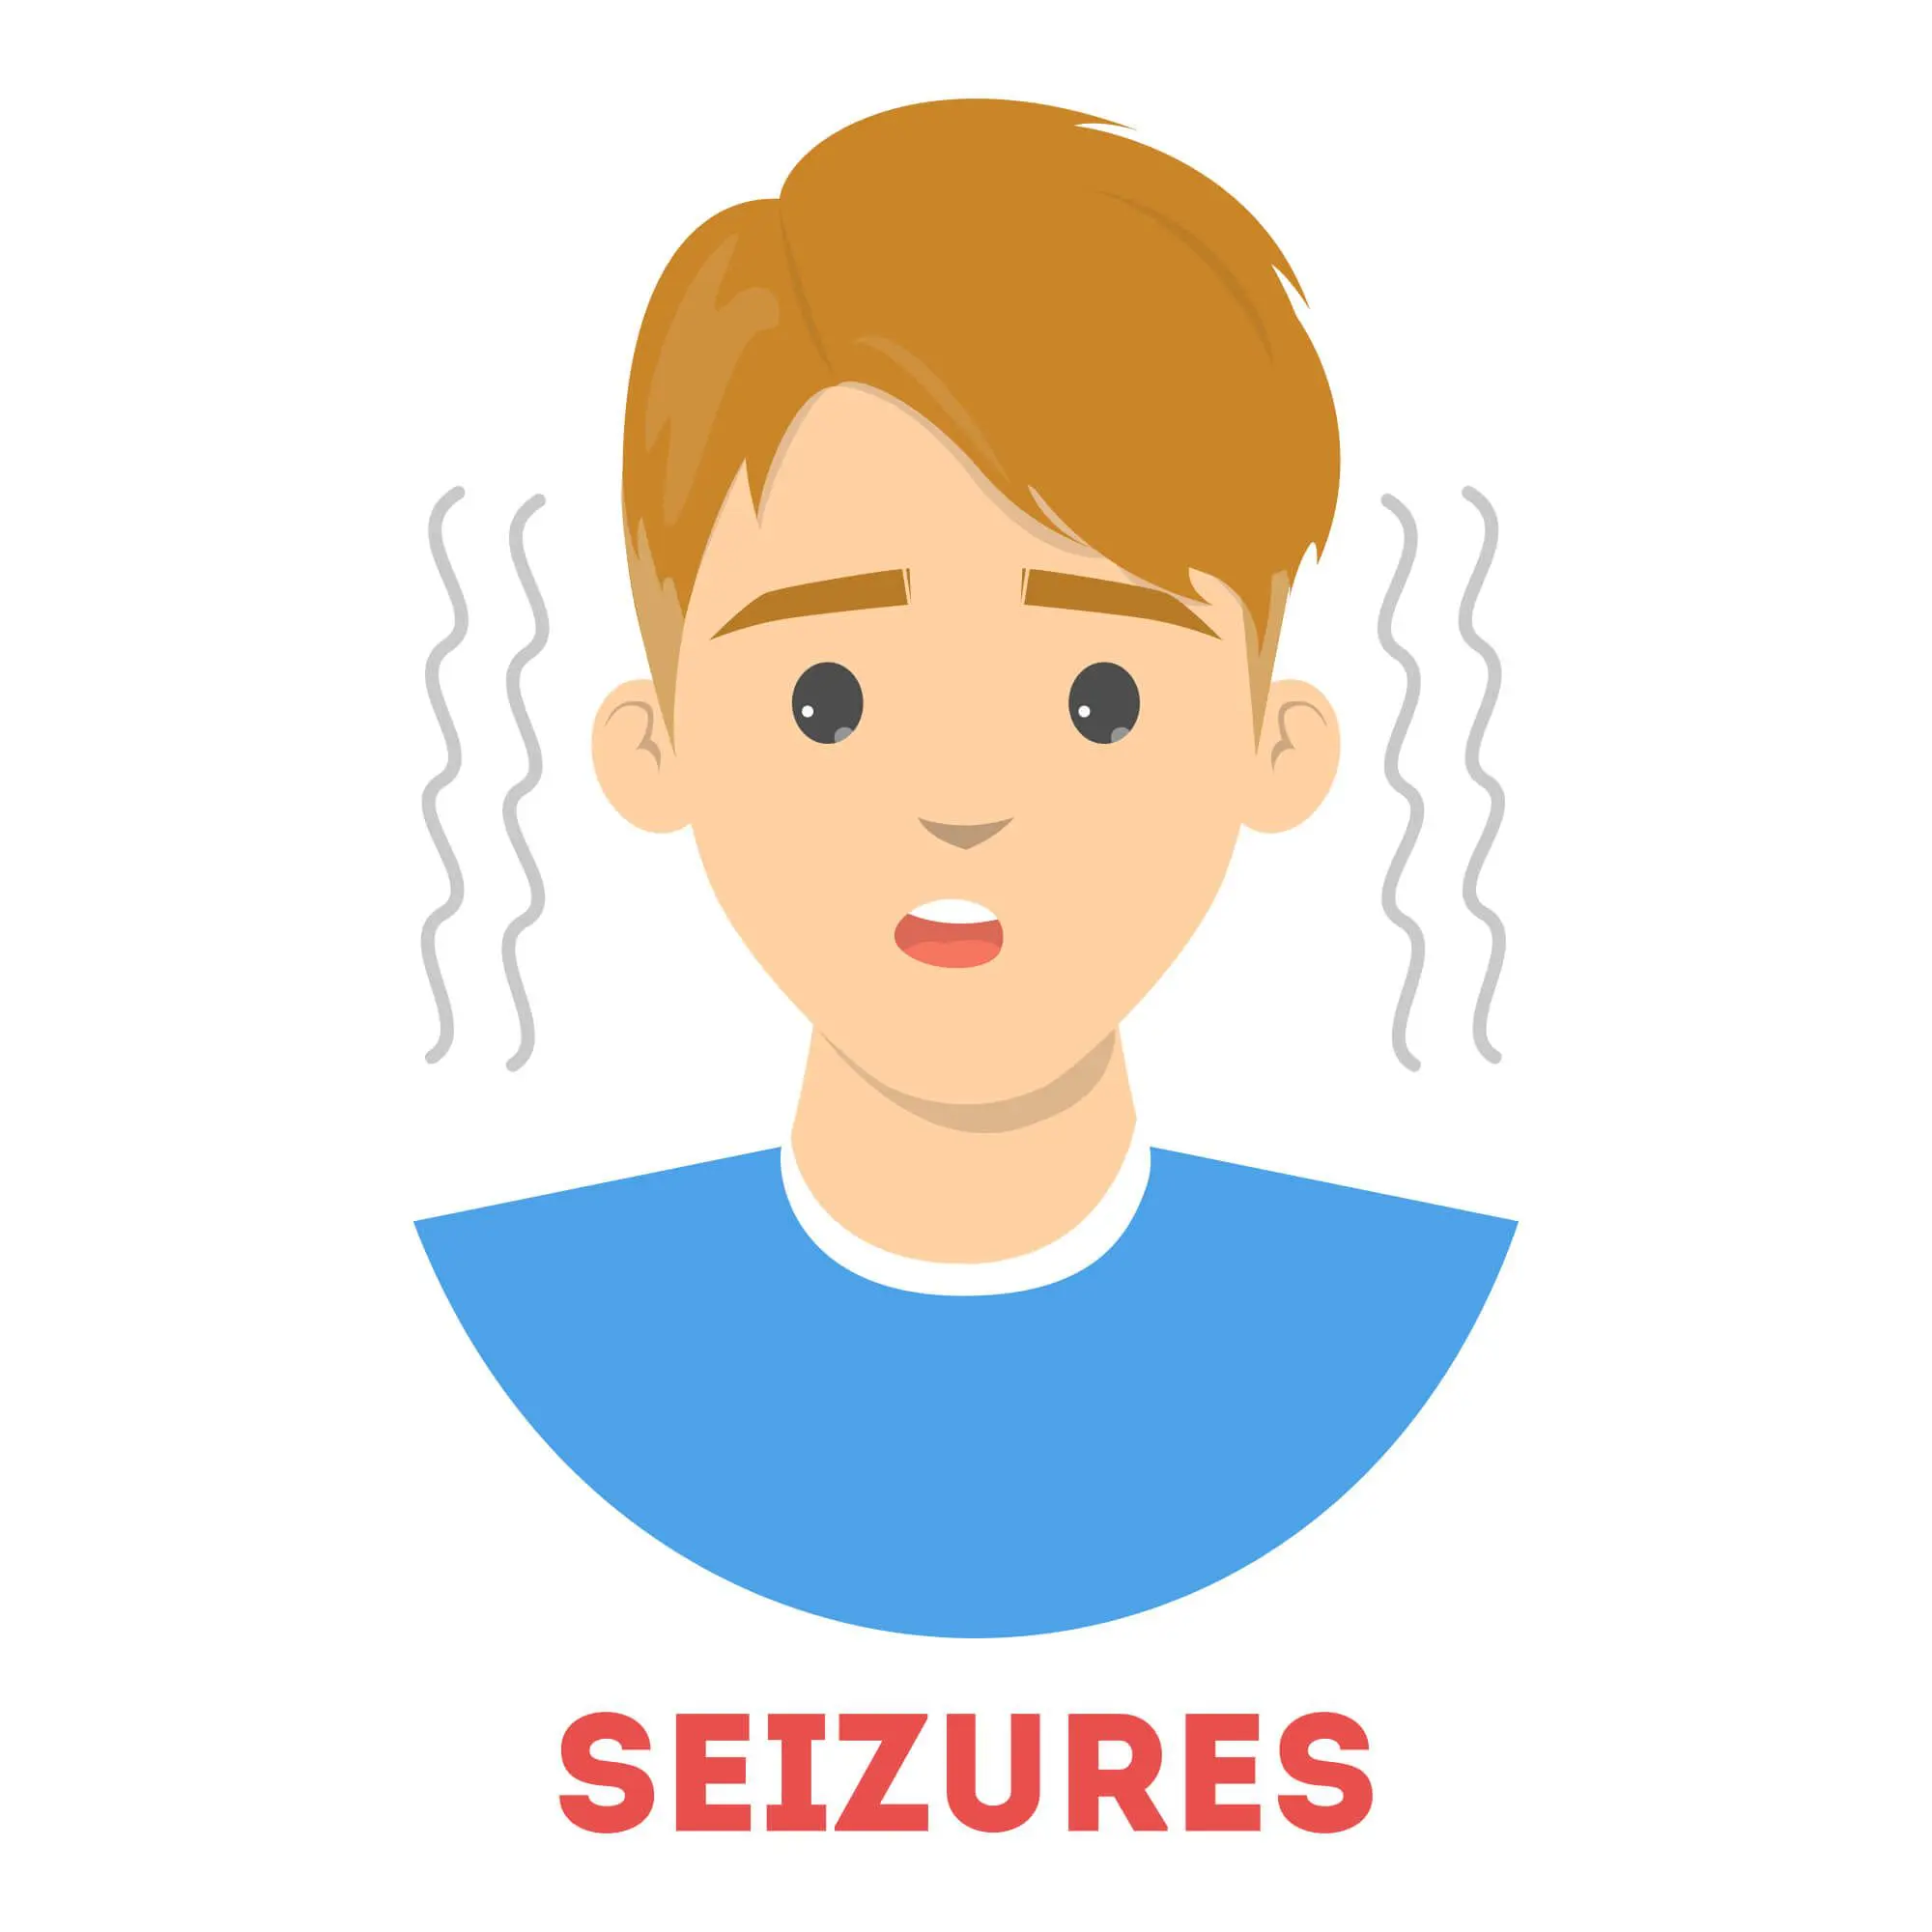 Seizures are caused by distributions in the electrical activity of the brain.